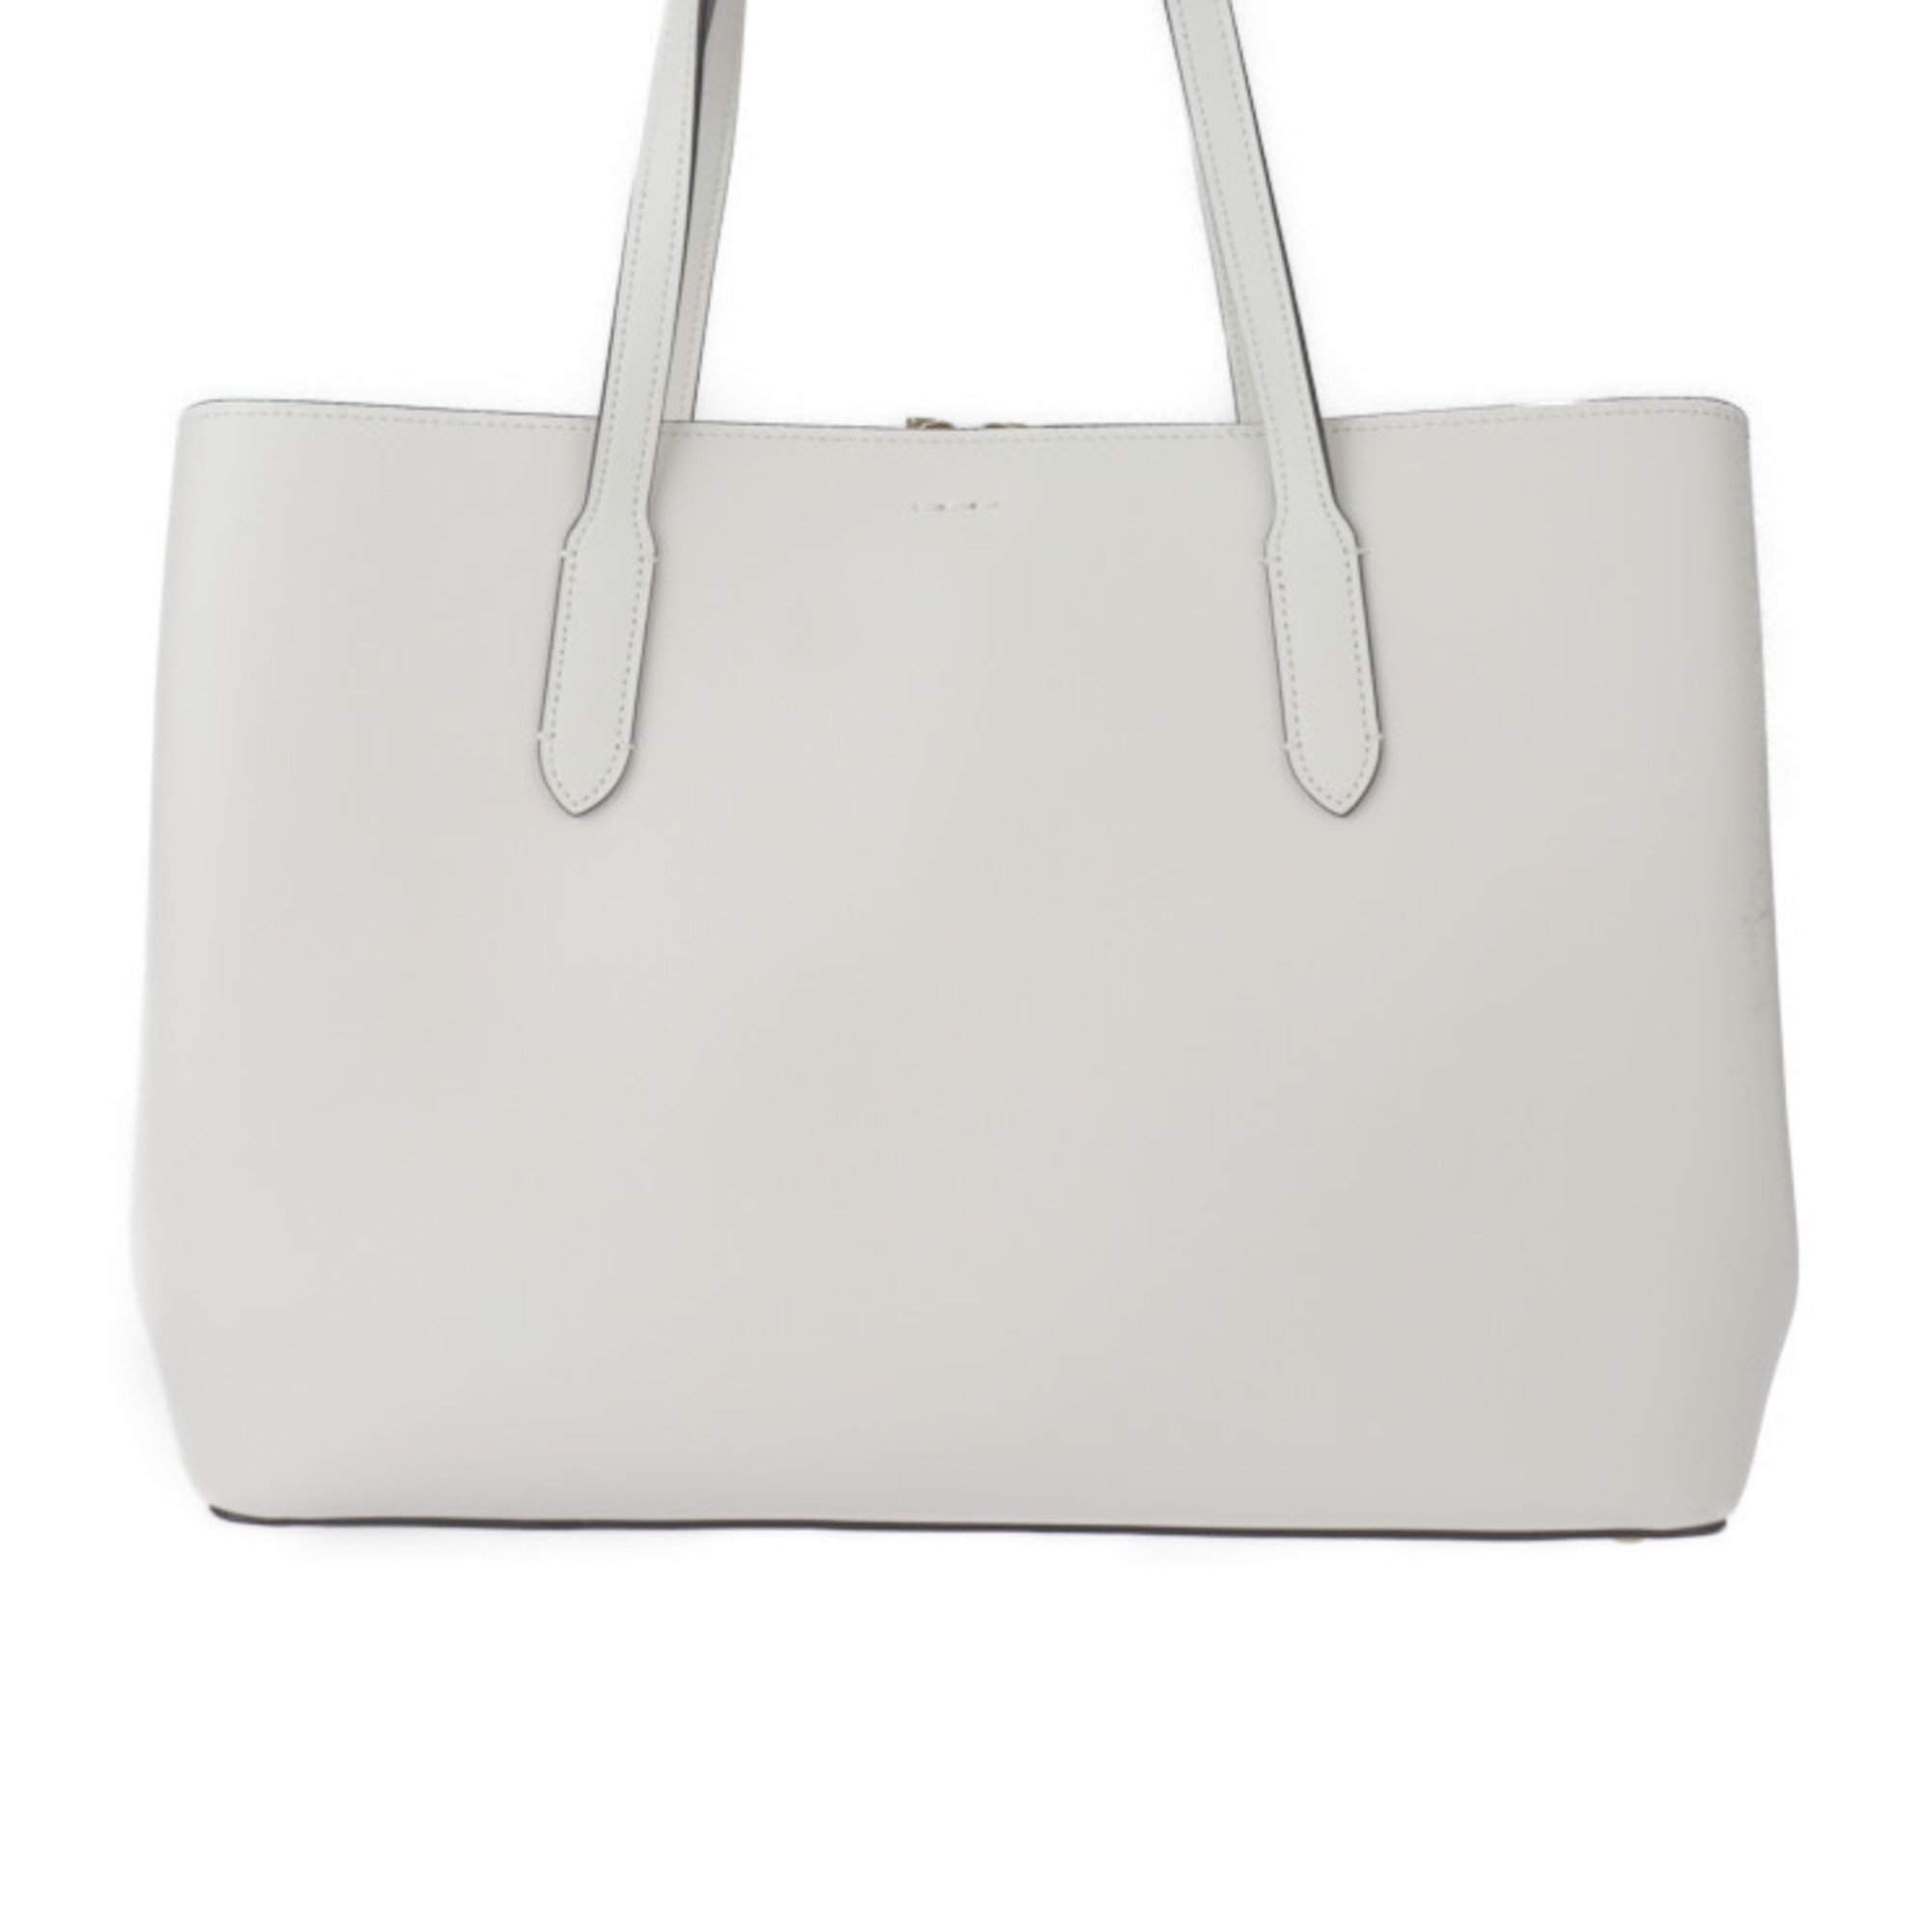 COACH Large Avenue Carryall Tote Bag F79988 Leather White Shoulder